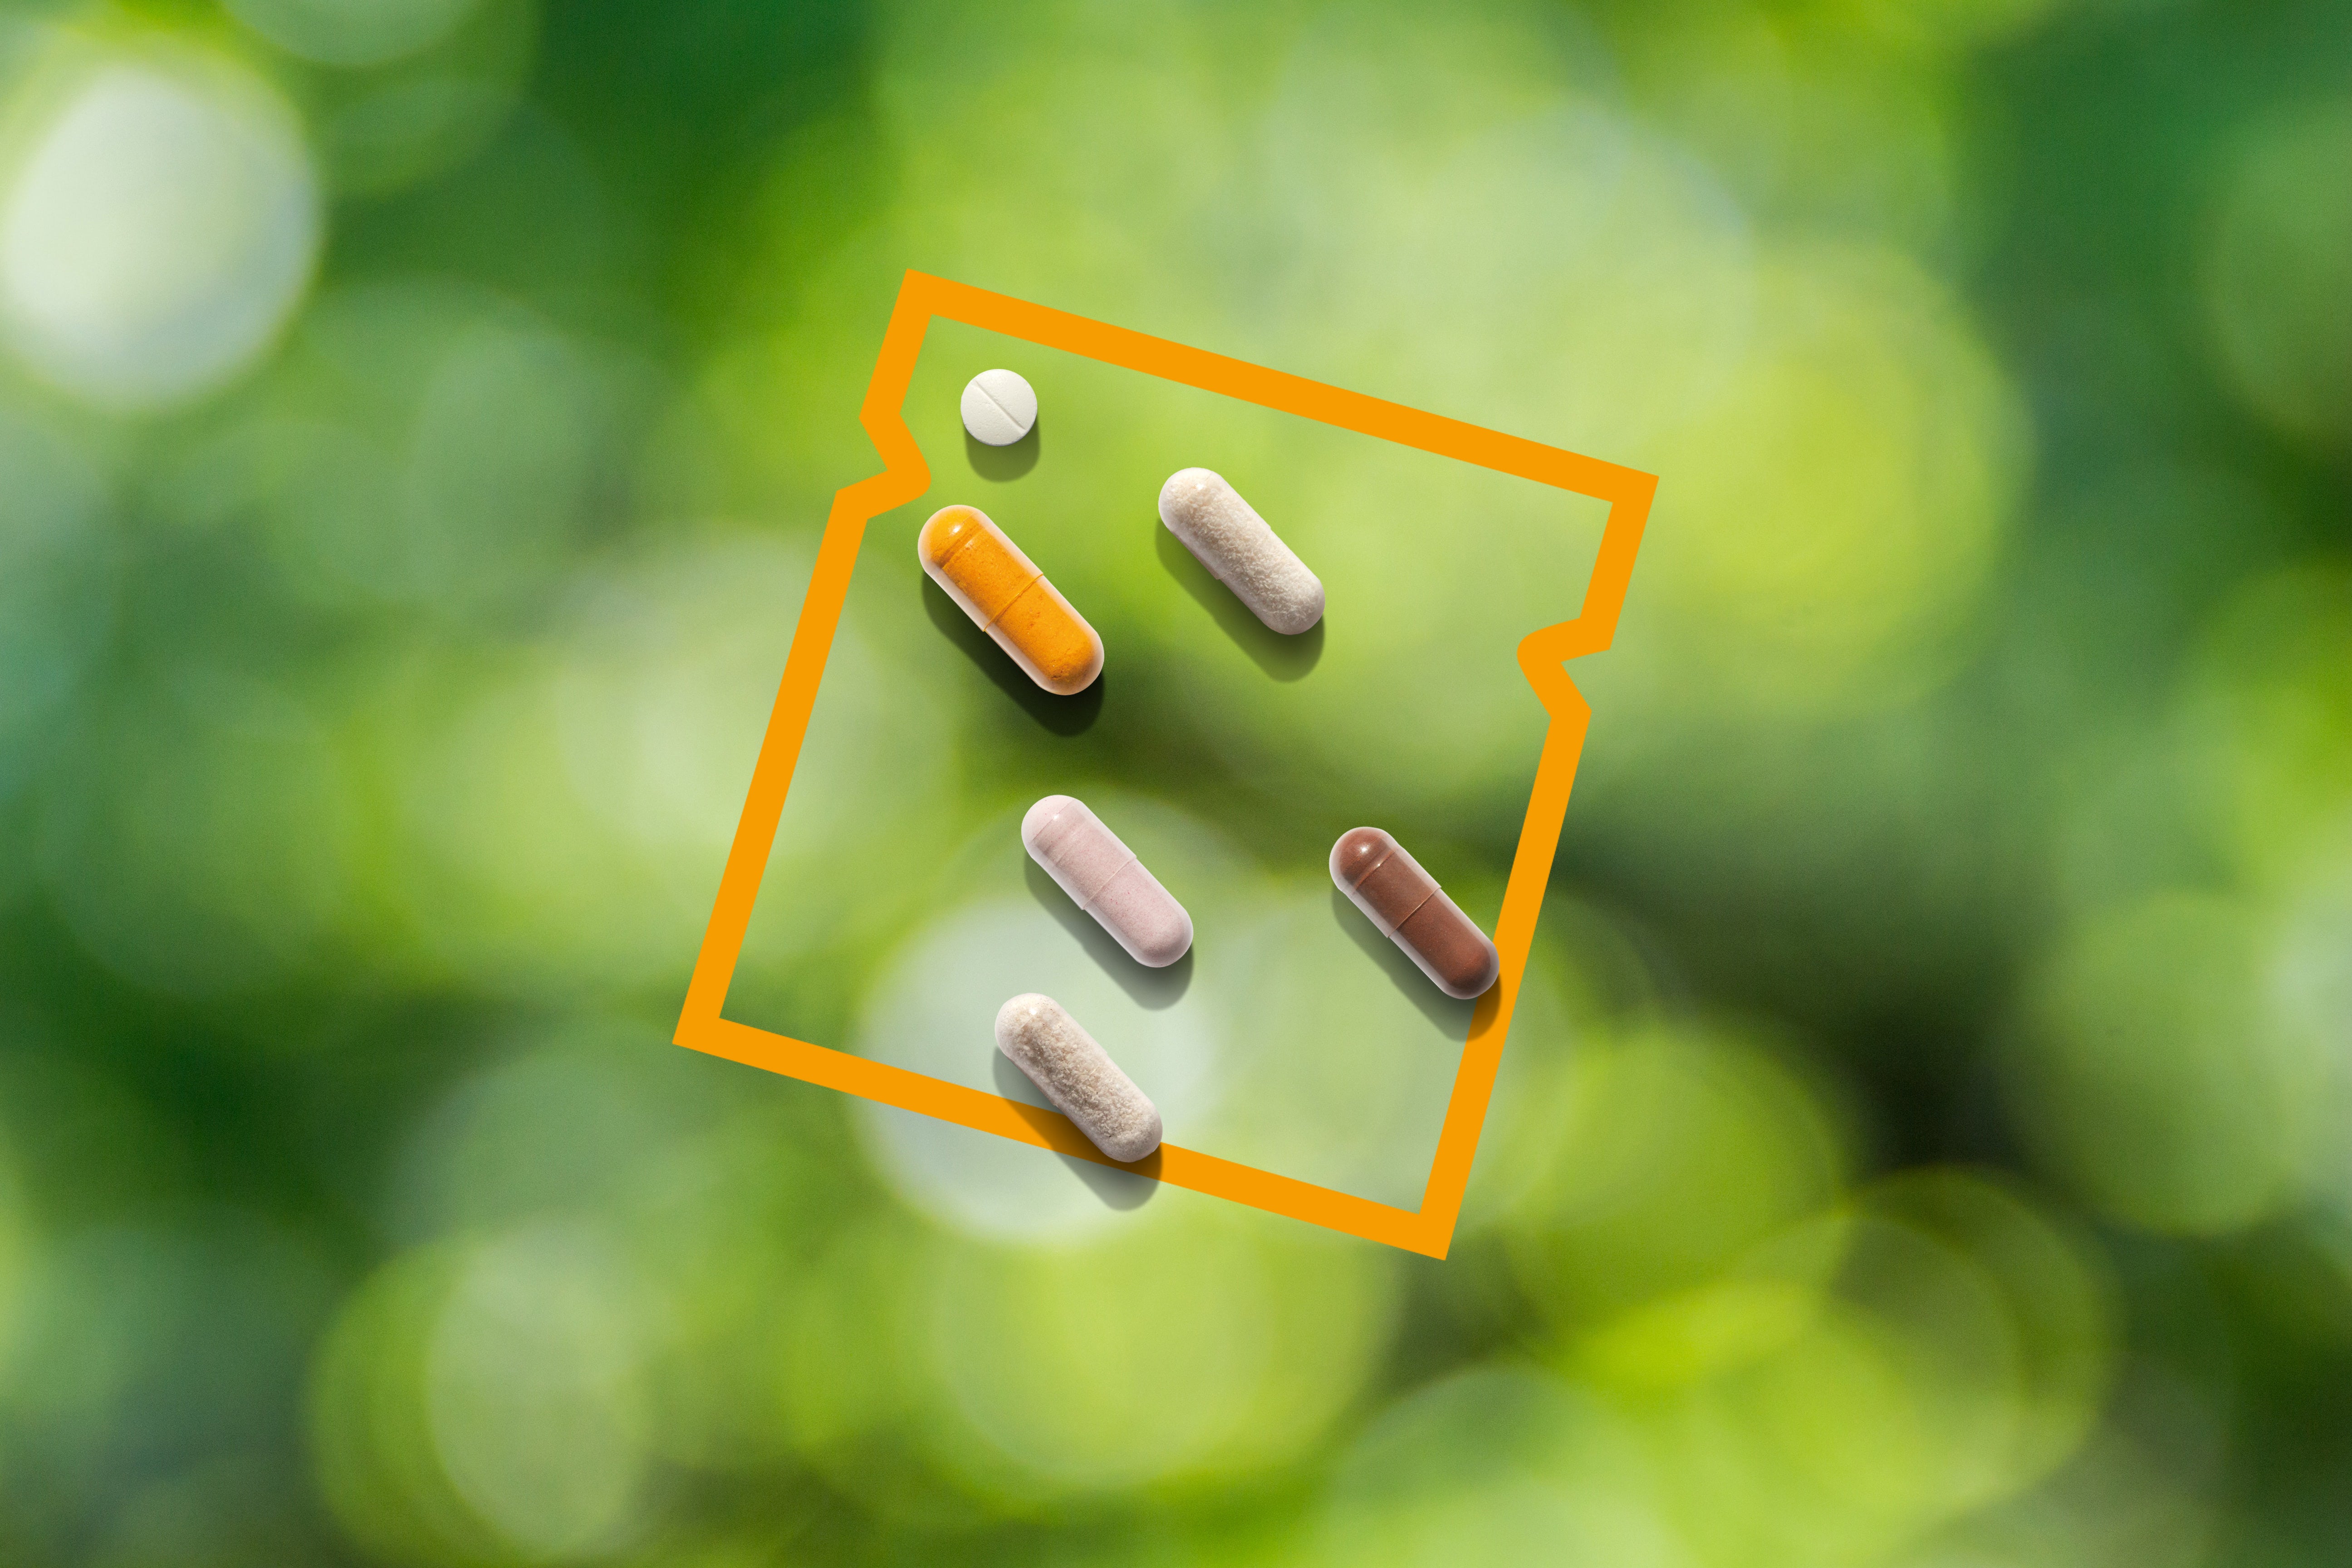 What do dietary supplements provide?